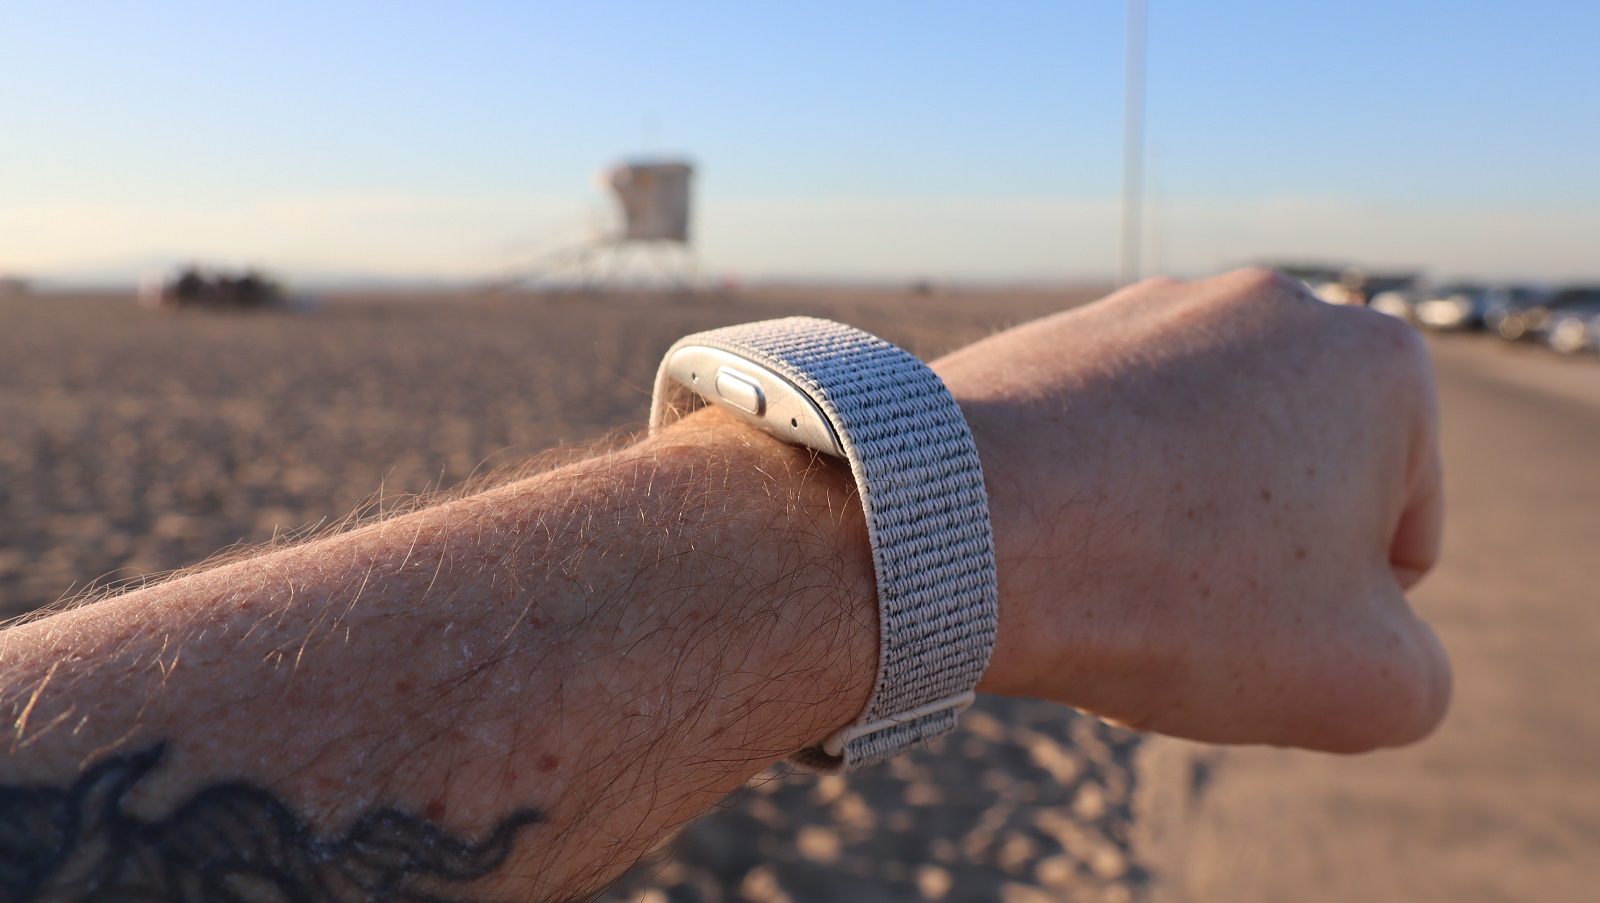 Halo review: Is this fitness tracker convenient?